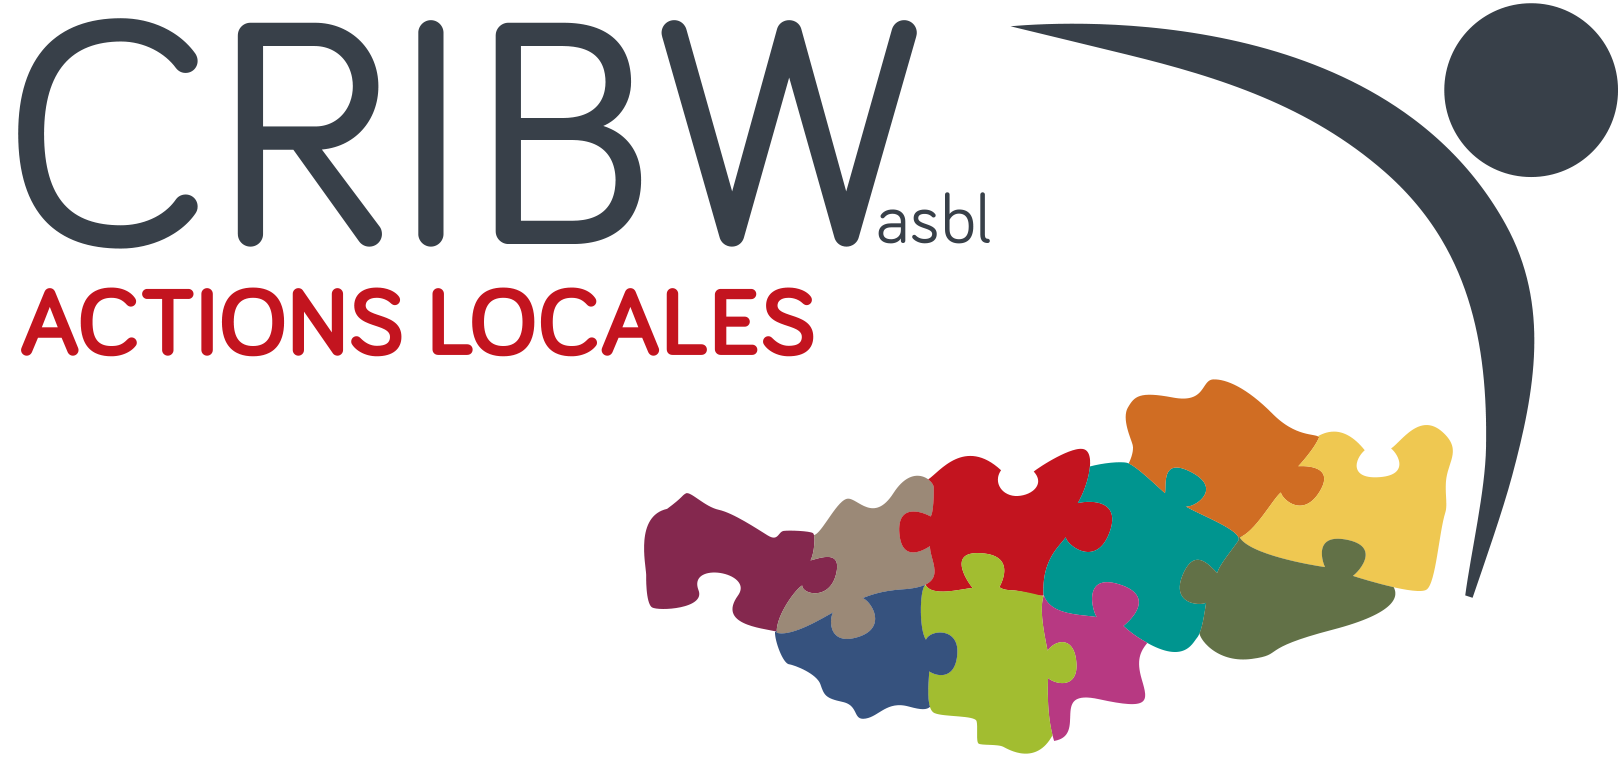 CRIBW Actions Locales